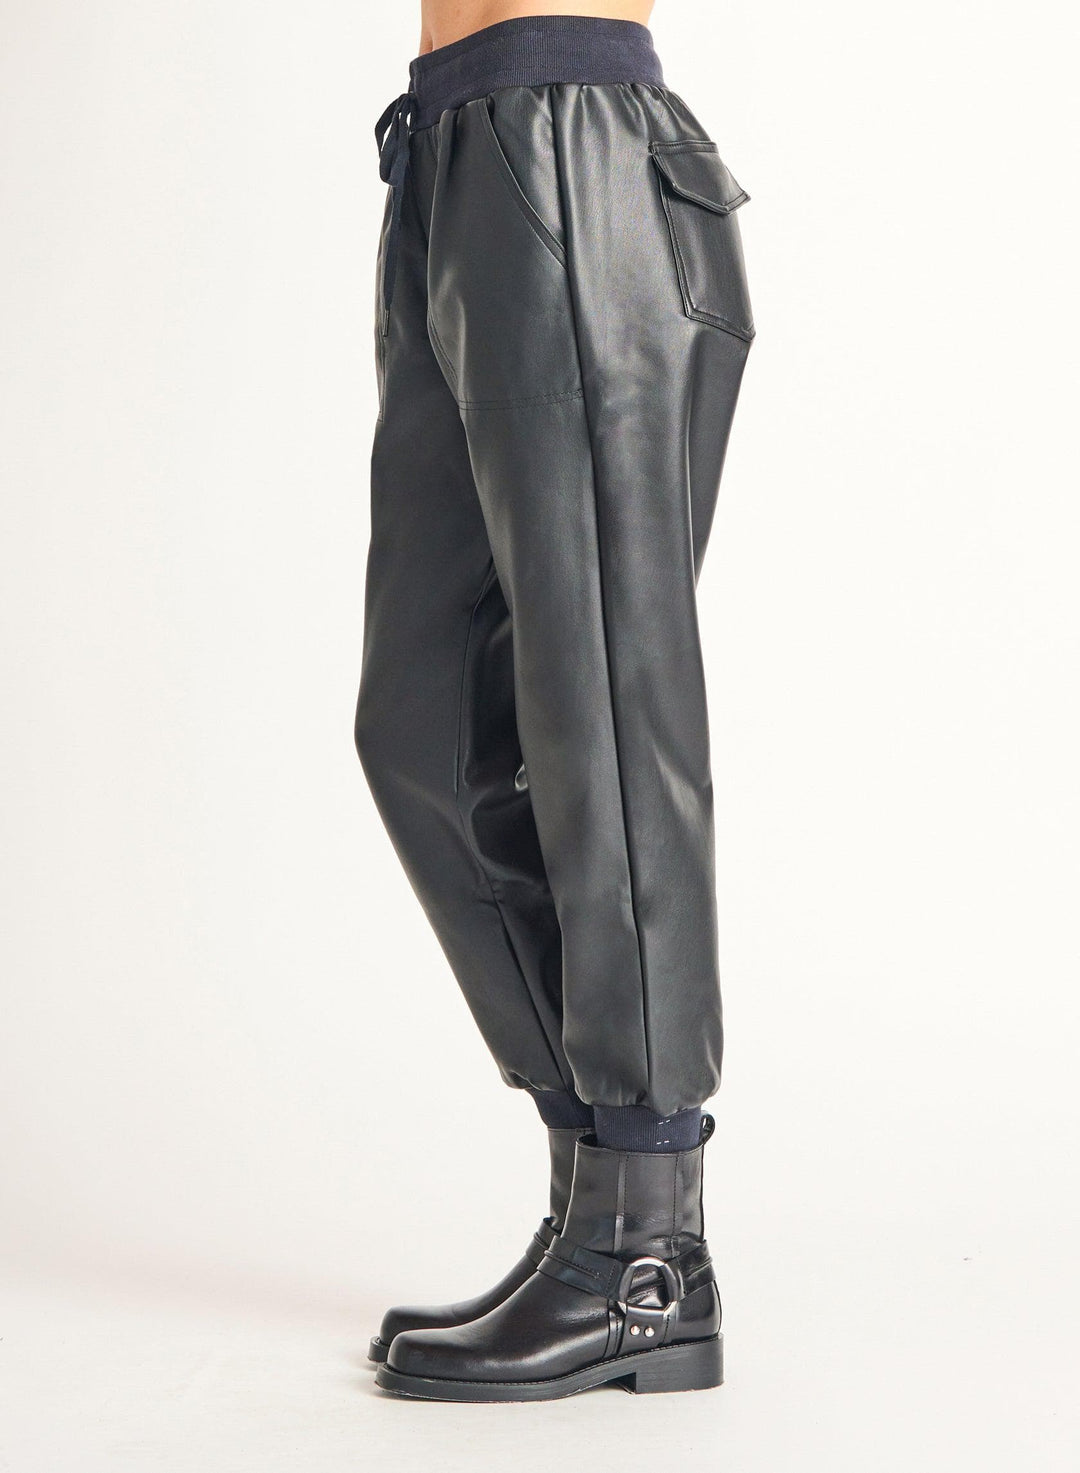 Faux Leather Pocket Joggers Pants Scout and Poppy Fashion Boutique